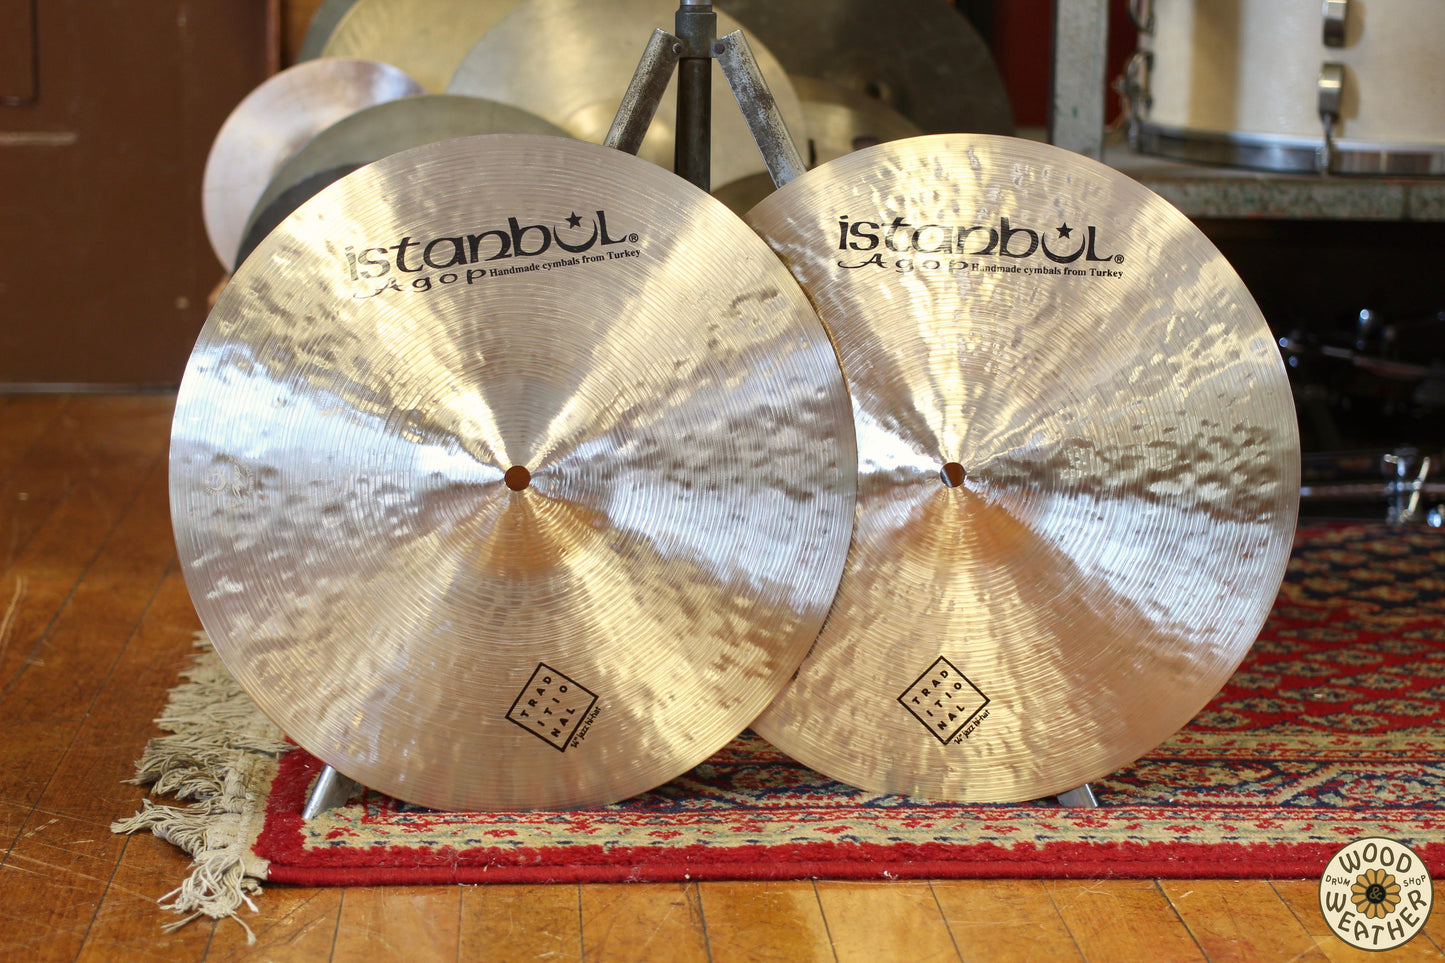 Istanbul Agop 14" Traditional Jazz Hi-Hat Cymbals 910/1120g